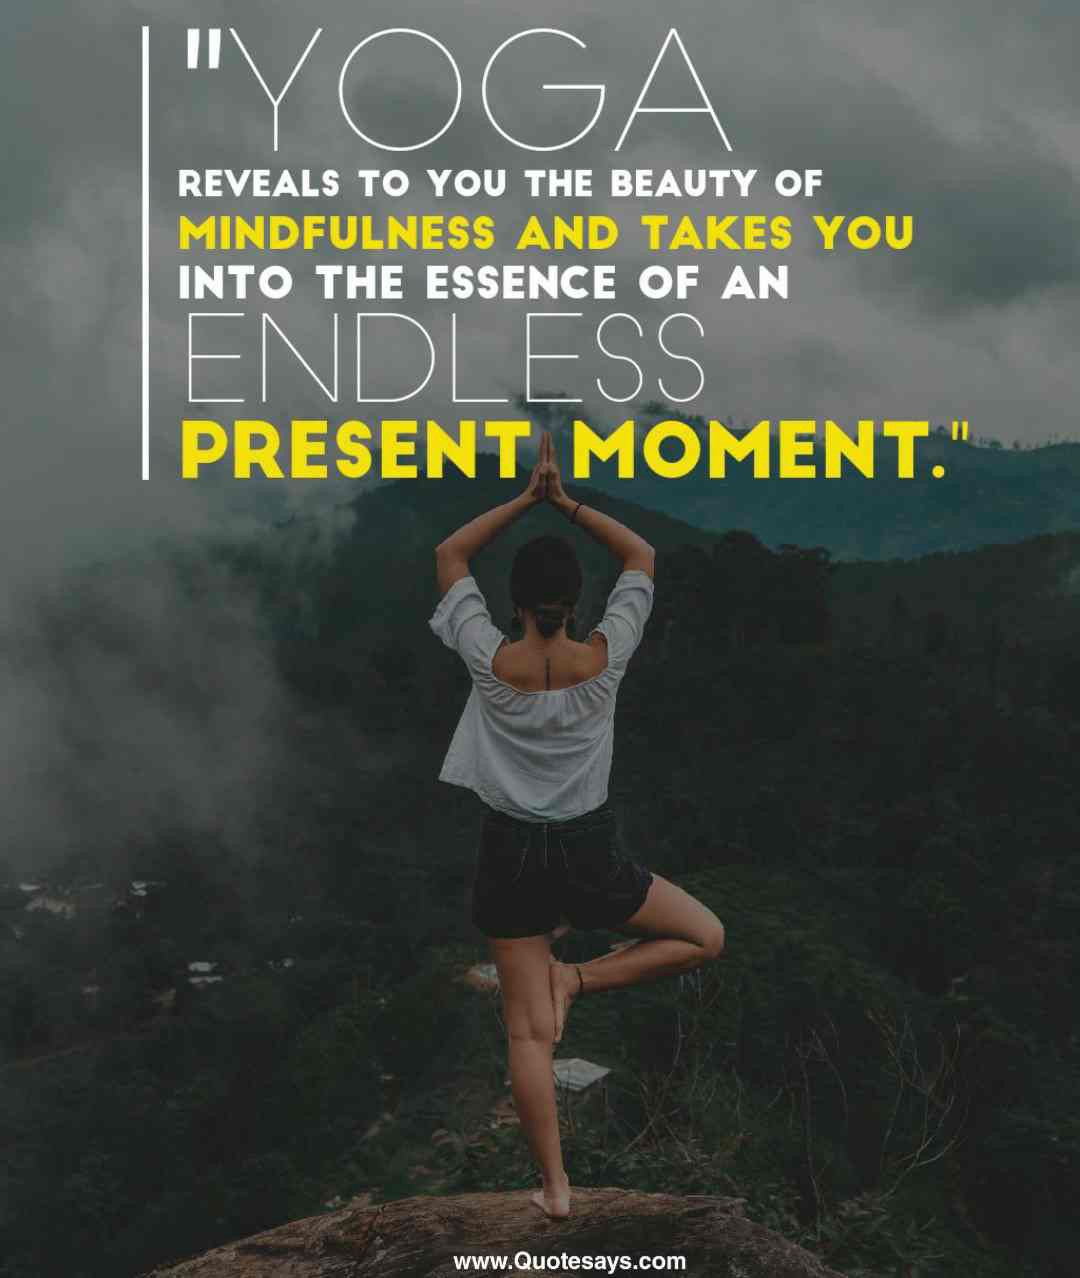 yoga reveals to you the beauty of mindfulness and takes you into the essence of an endless present moment